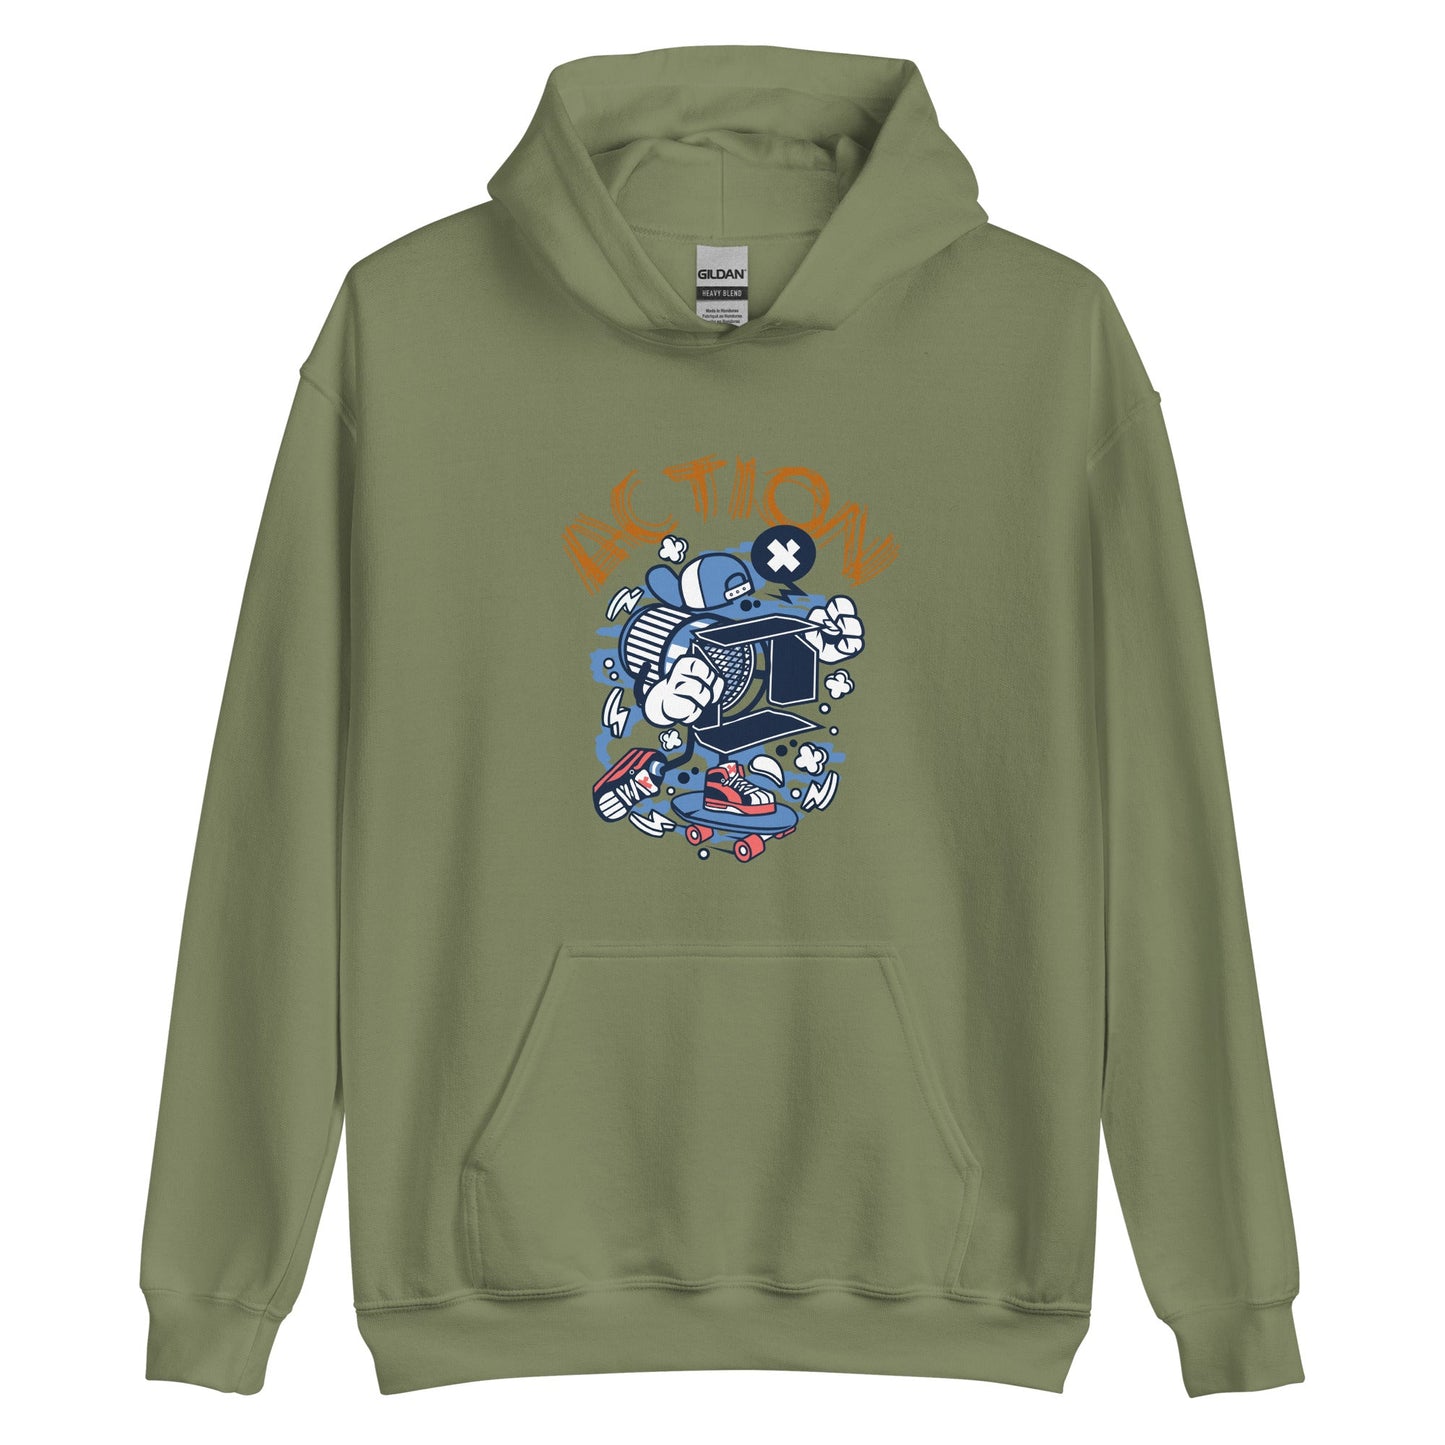 Camera Action Unisex Hoodie - Capture Moments in Style